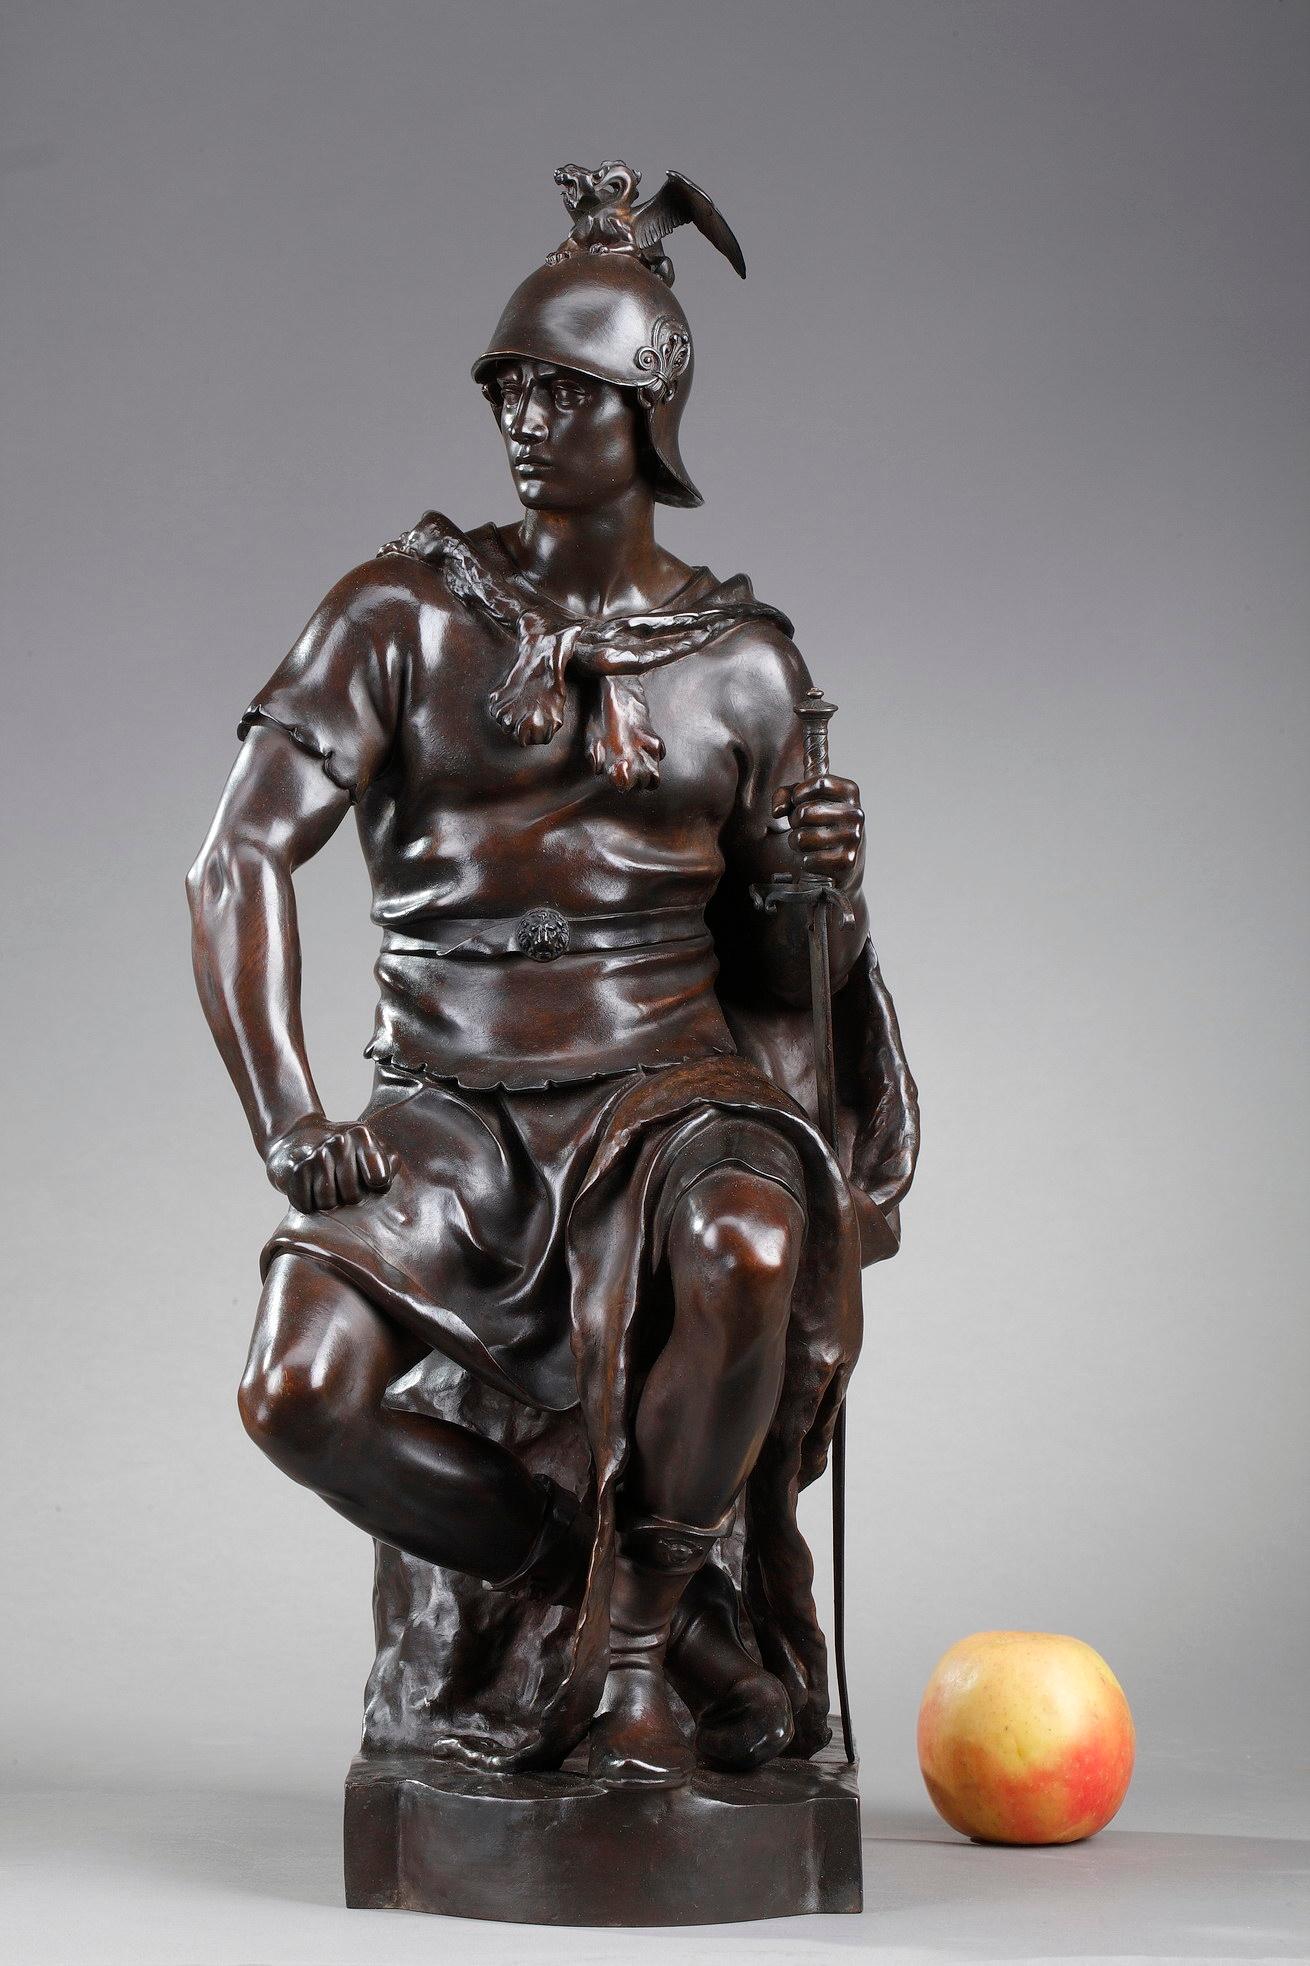 Late 19th century allegorical bronze figure of the Courage militaire [Military courage], designed by Paul Dubois and cast by the French bronzeur Ferdinand Barbedienne. Signed on the base P. DUBOIS. Marked F. BARBEDIENNE Fondeur Paris and Reduction